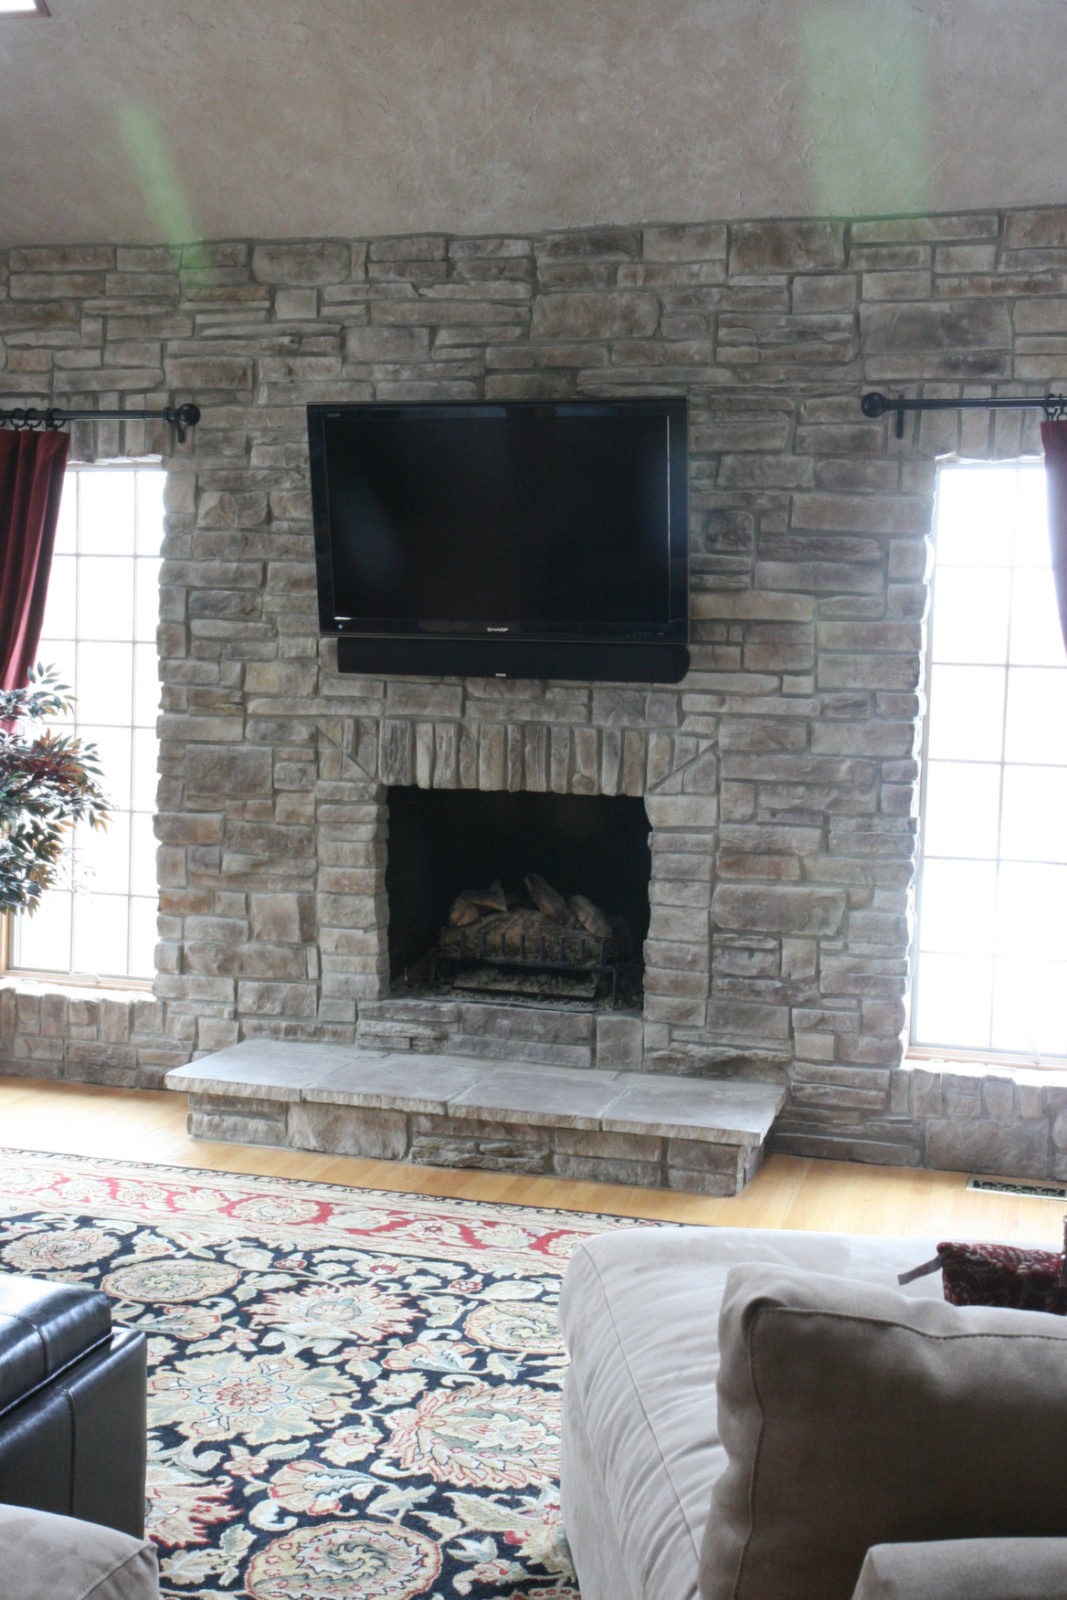 Gray mountain stack stone veneer fireplace in a brightly lit living room